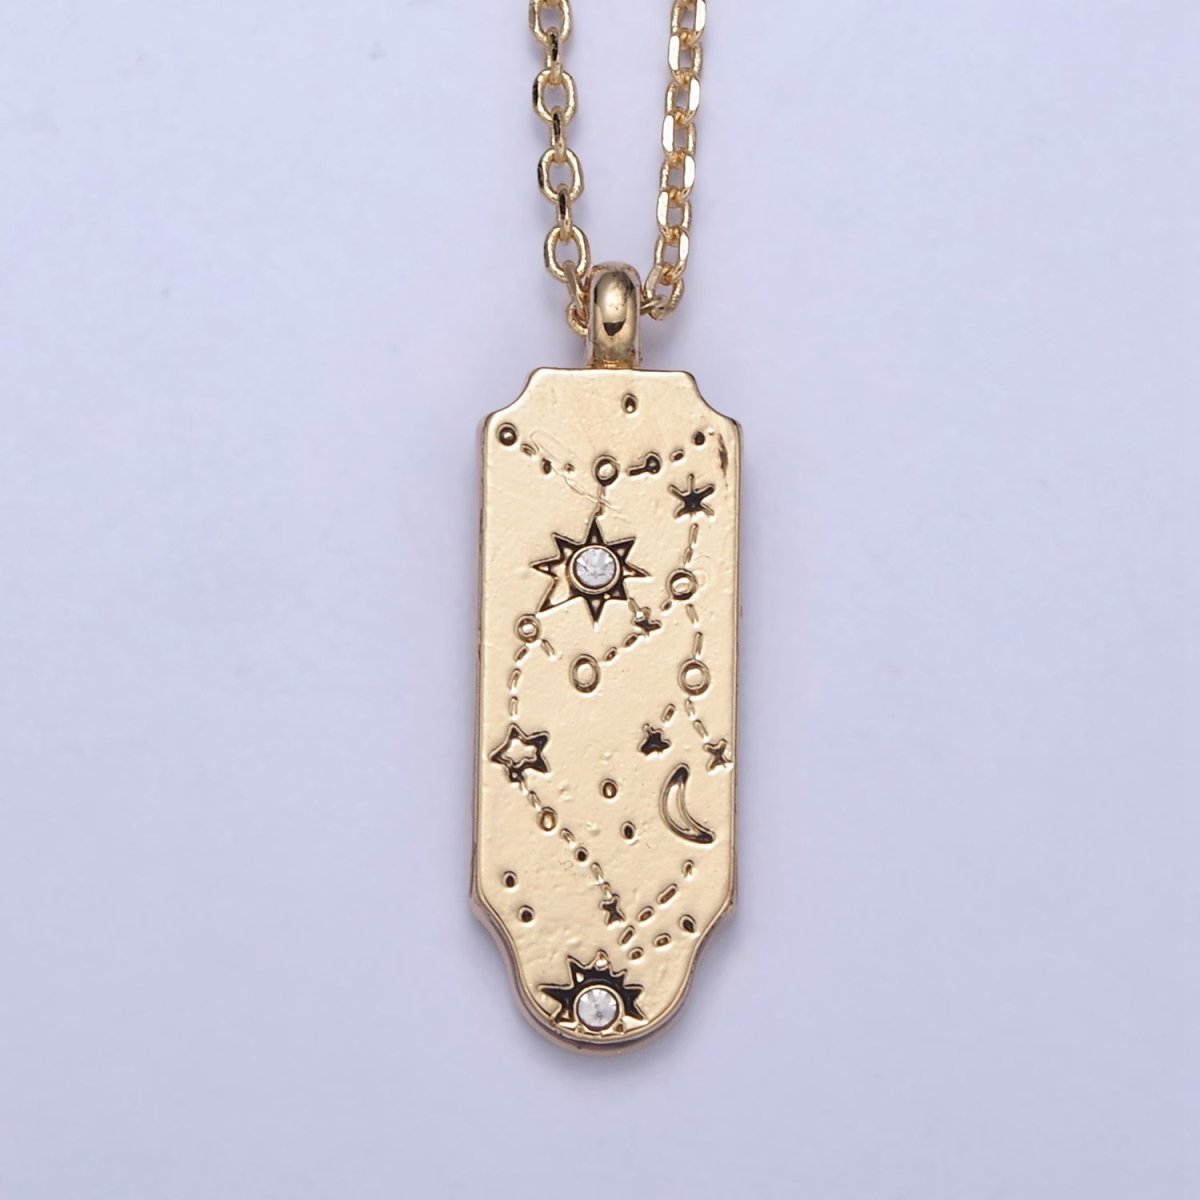 Constellation Zodiac Charms Necklace Astrology Zodiac Necklace Charms, 12 Zodiac Charms Ready to Wear Necklace for Personalized Jewelry Wholesale | WA-491 to WA-502 Clearance Pricing - DLUXCA